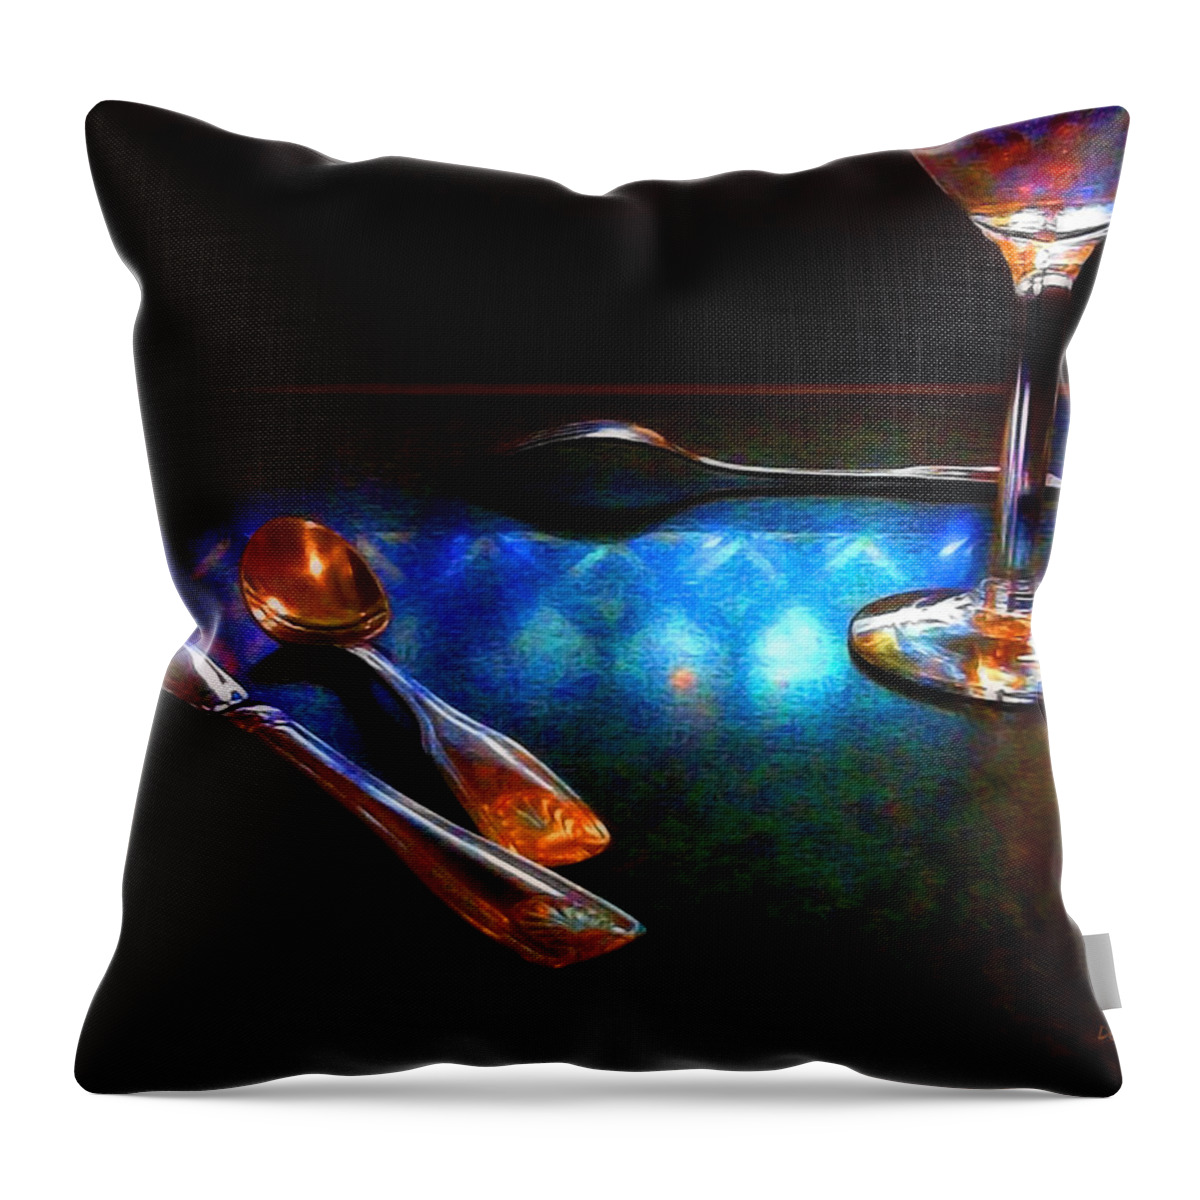 Table Throw Pillow featuring the digital art Sur La Table by Donna Blackhall